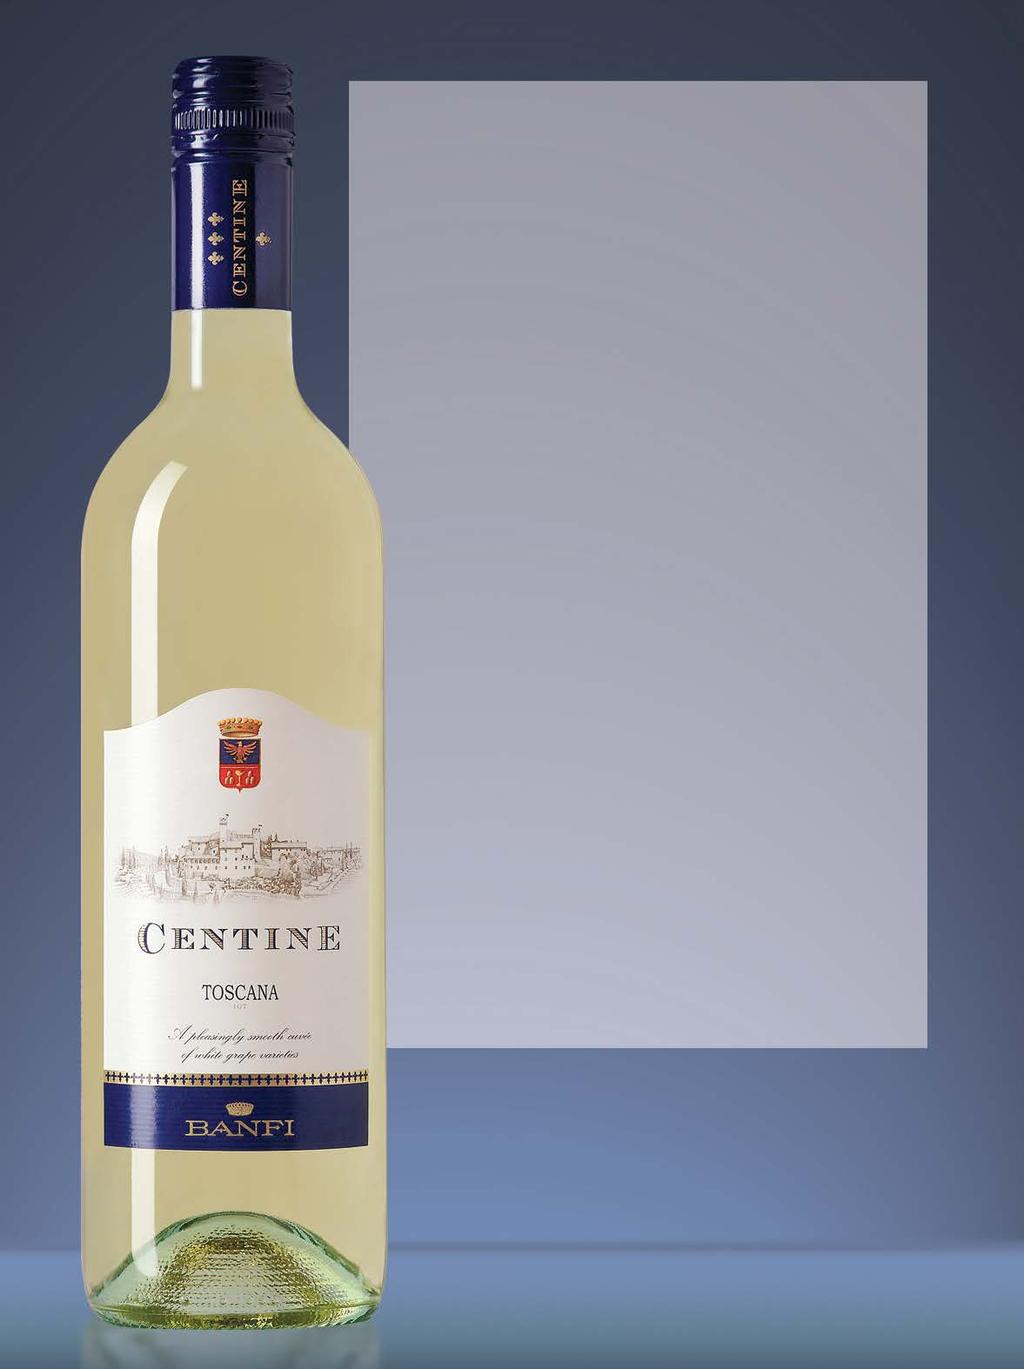 S U P E R P R E M I U M T I E R CENTINE BIANCO DESCRIPTION SHEET Centine Bianco Toscana igt Production Area: Grape Varieties: Description: Hillside vineyards in the southern part of Tuscany.